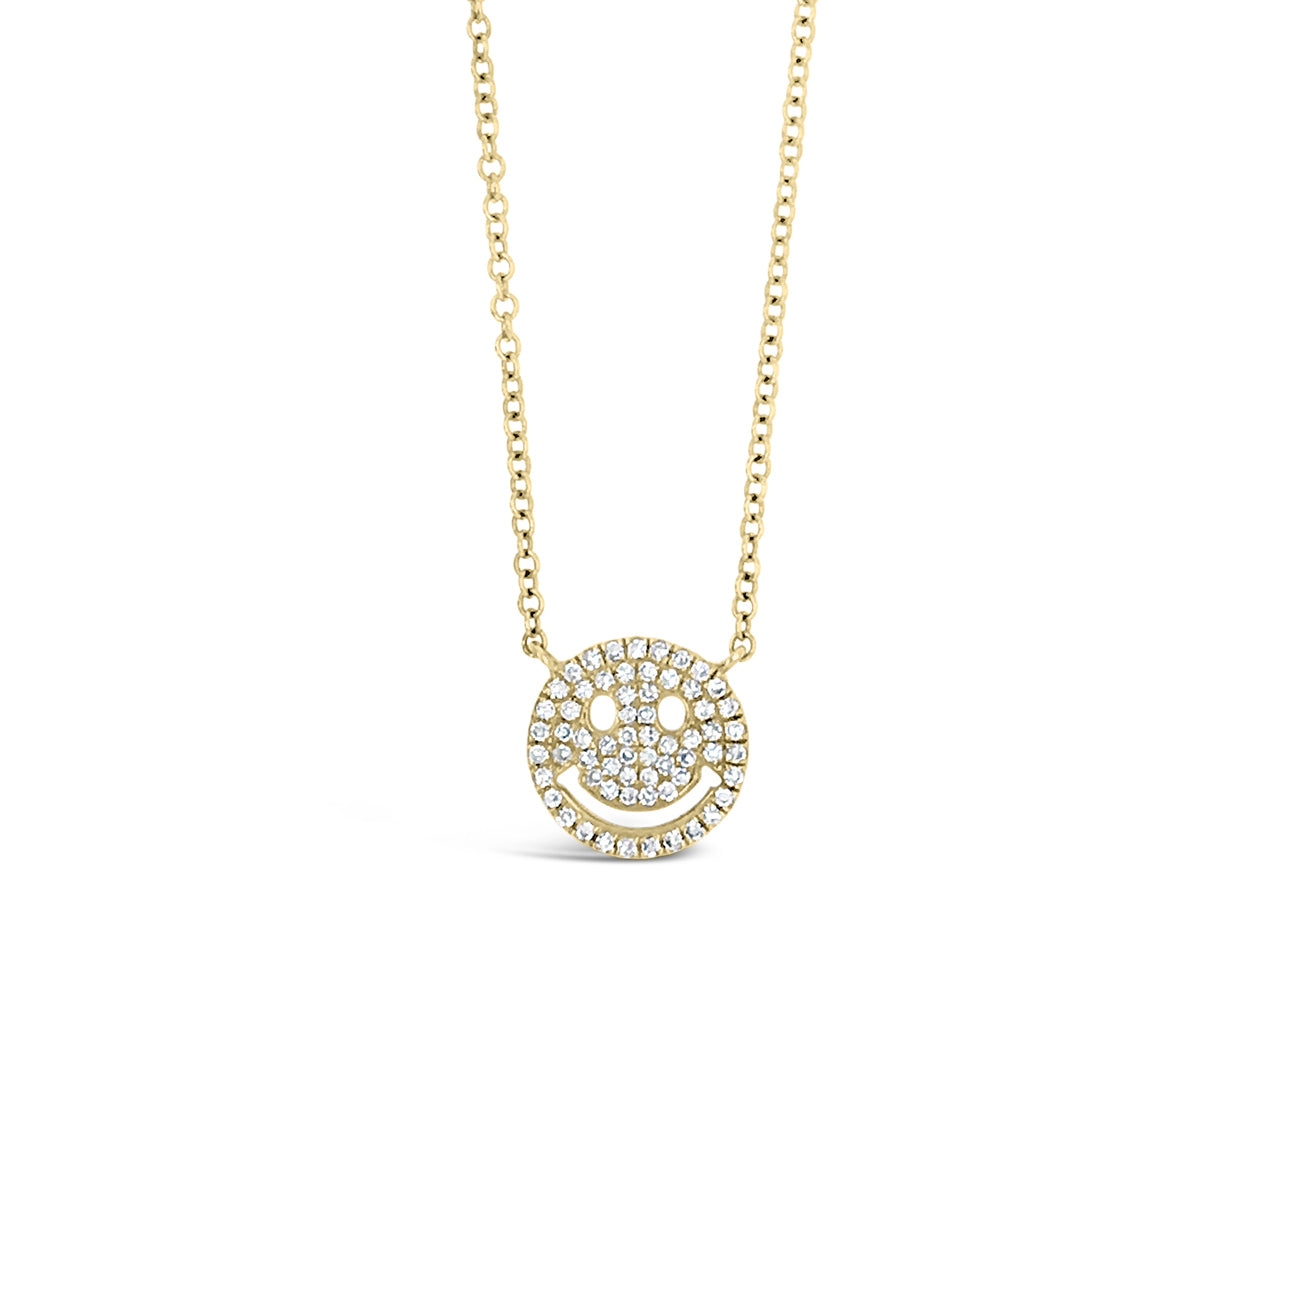 Solid 14k yellow gold weighing 1.87 grams with 63 round diamonds weighing .14 carats Small Smiley Face Pendant Necklace | Nuha Jewelers